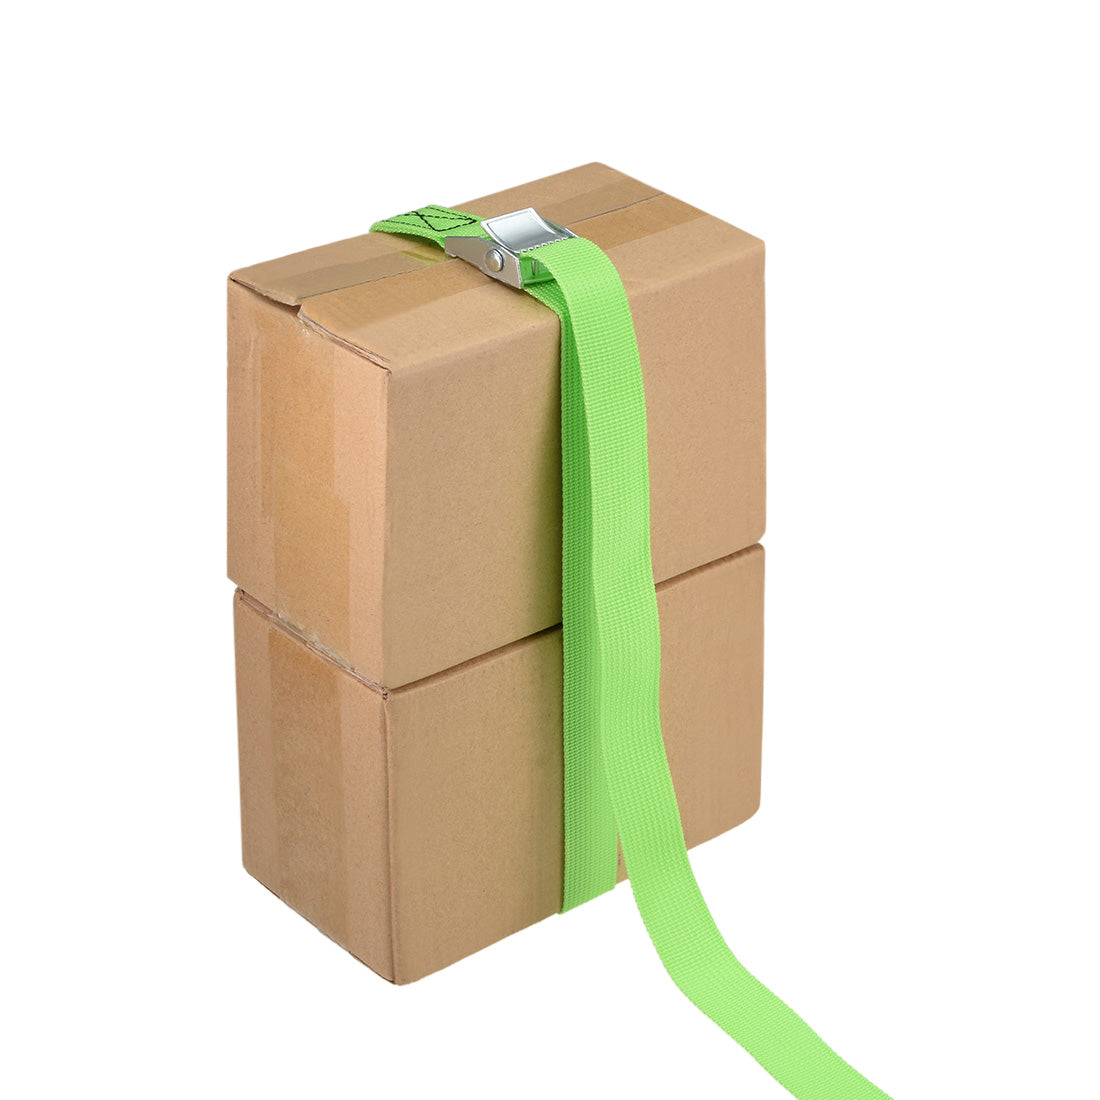 uxcell Uxcell Lashing Strap 1" x 5' Cargo Tie Down Straps with Cam Lock Buckle Up to 551lbs Green 2pcs